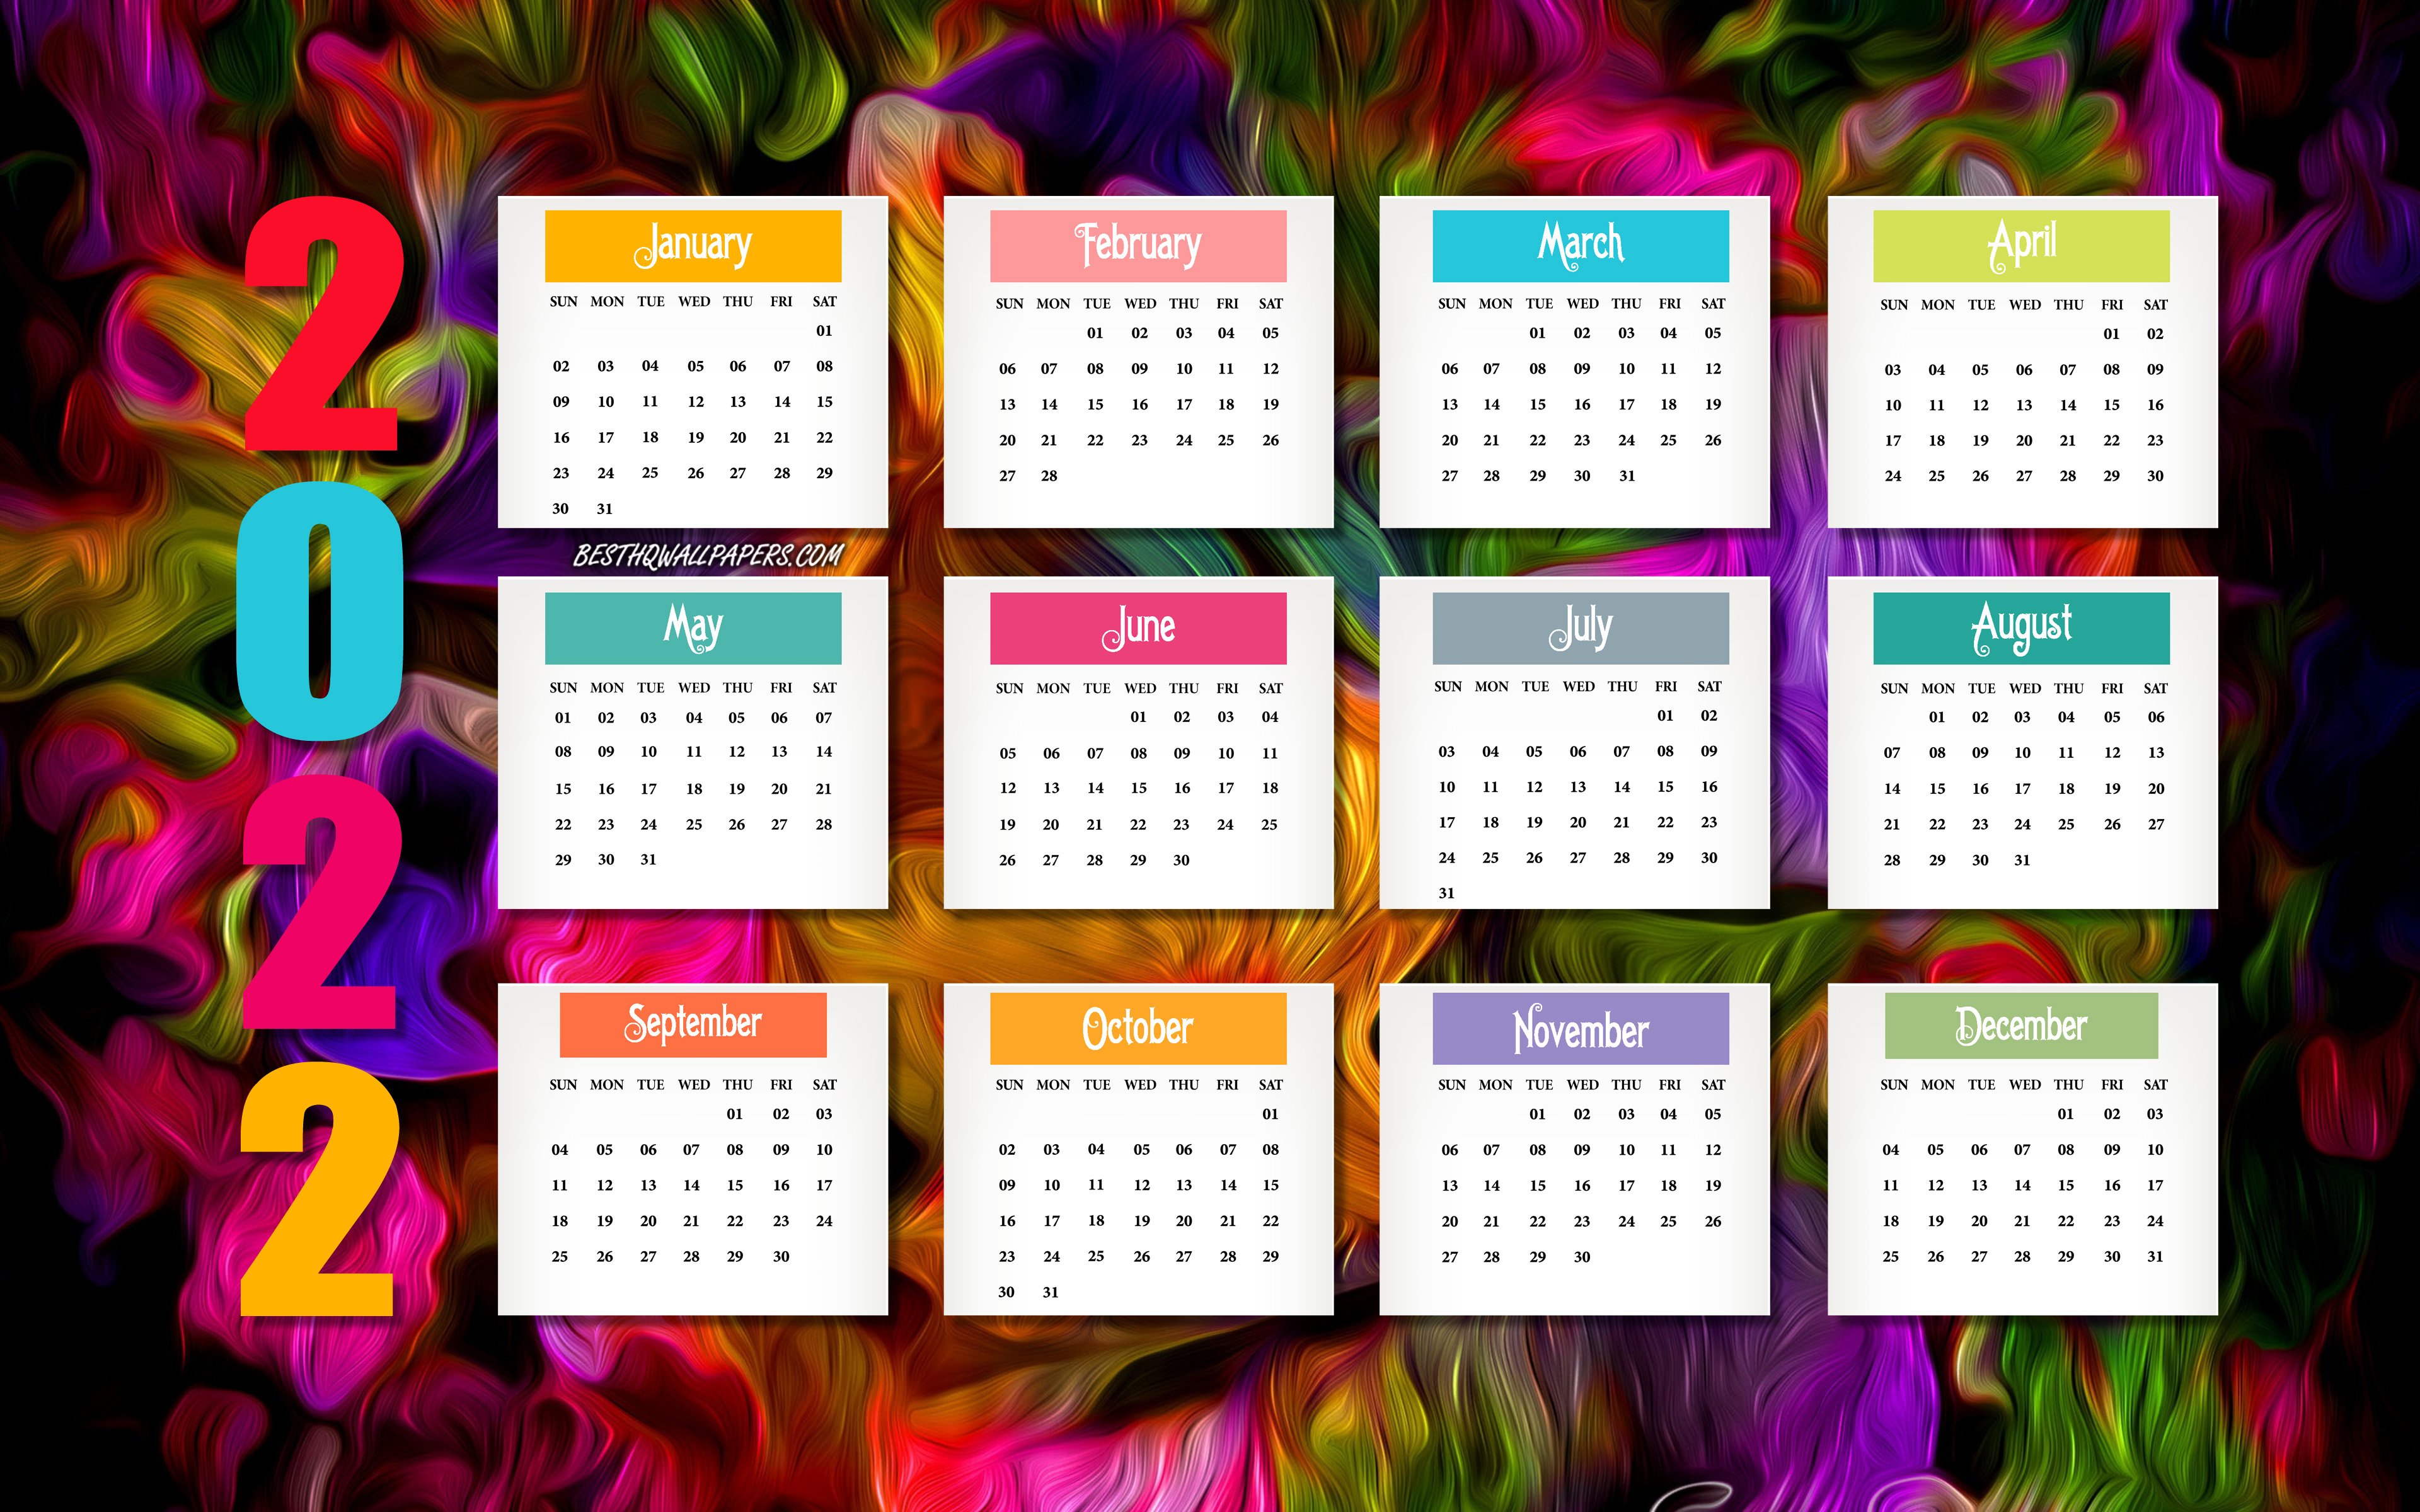 Download wallpaper 2022 Calendar, colorful background, 2022 all months calendar, 2022 concepts, 2022 New Year Calendar for desktop with resolution 3840x2400. High Quality HD picture wallpaper